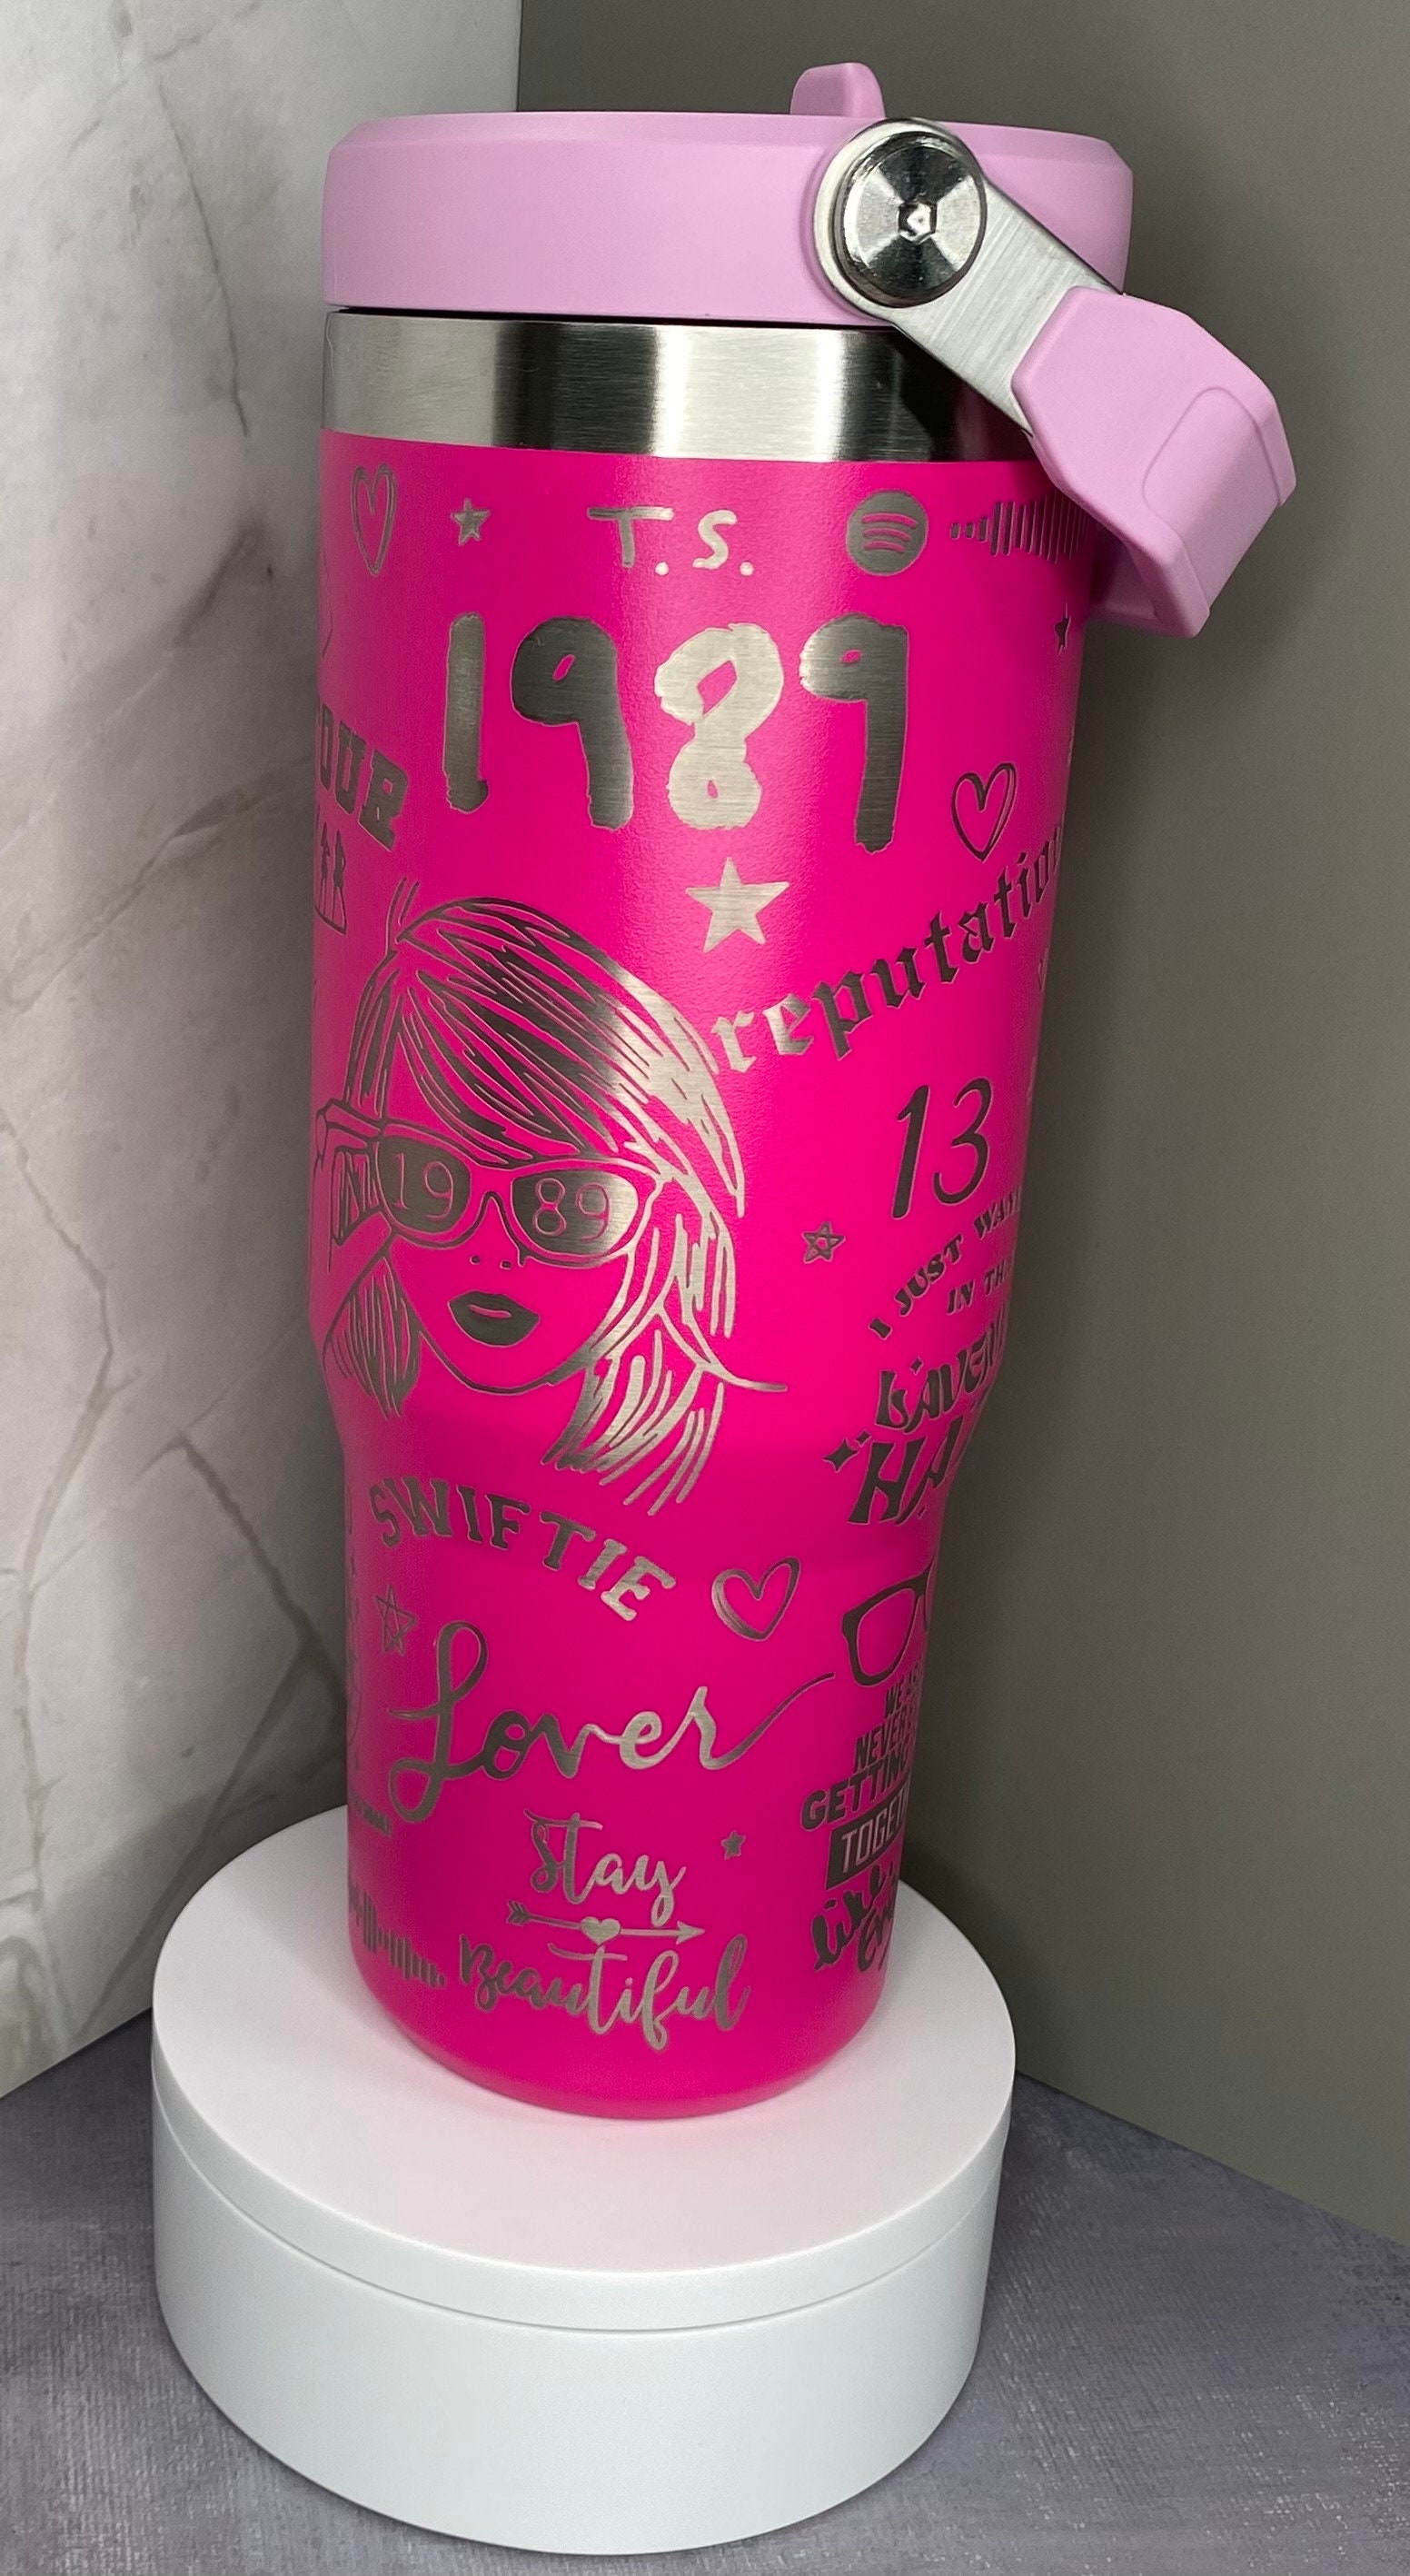 New Taylor Swift design! Only 2 30oz cups left in stock